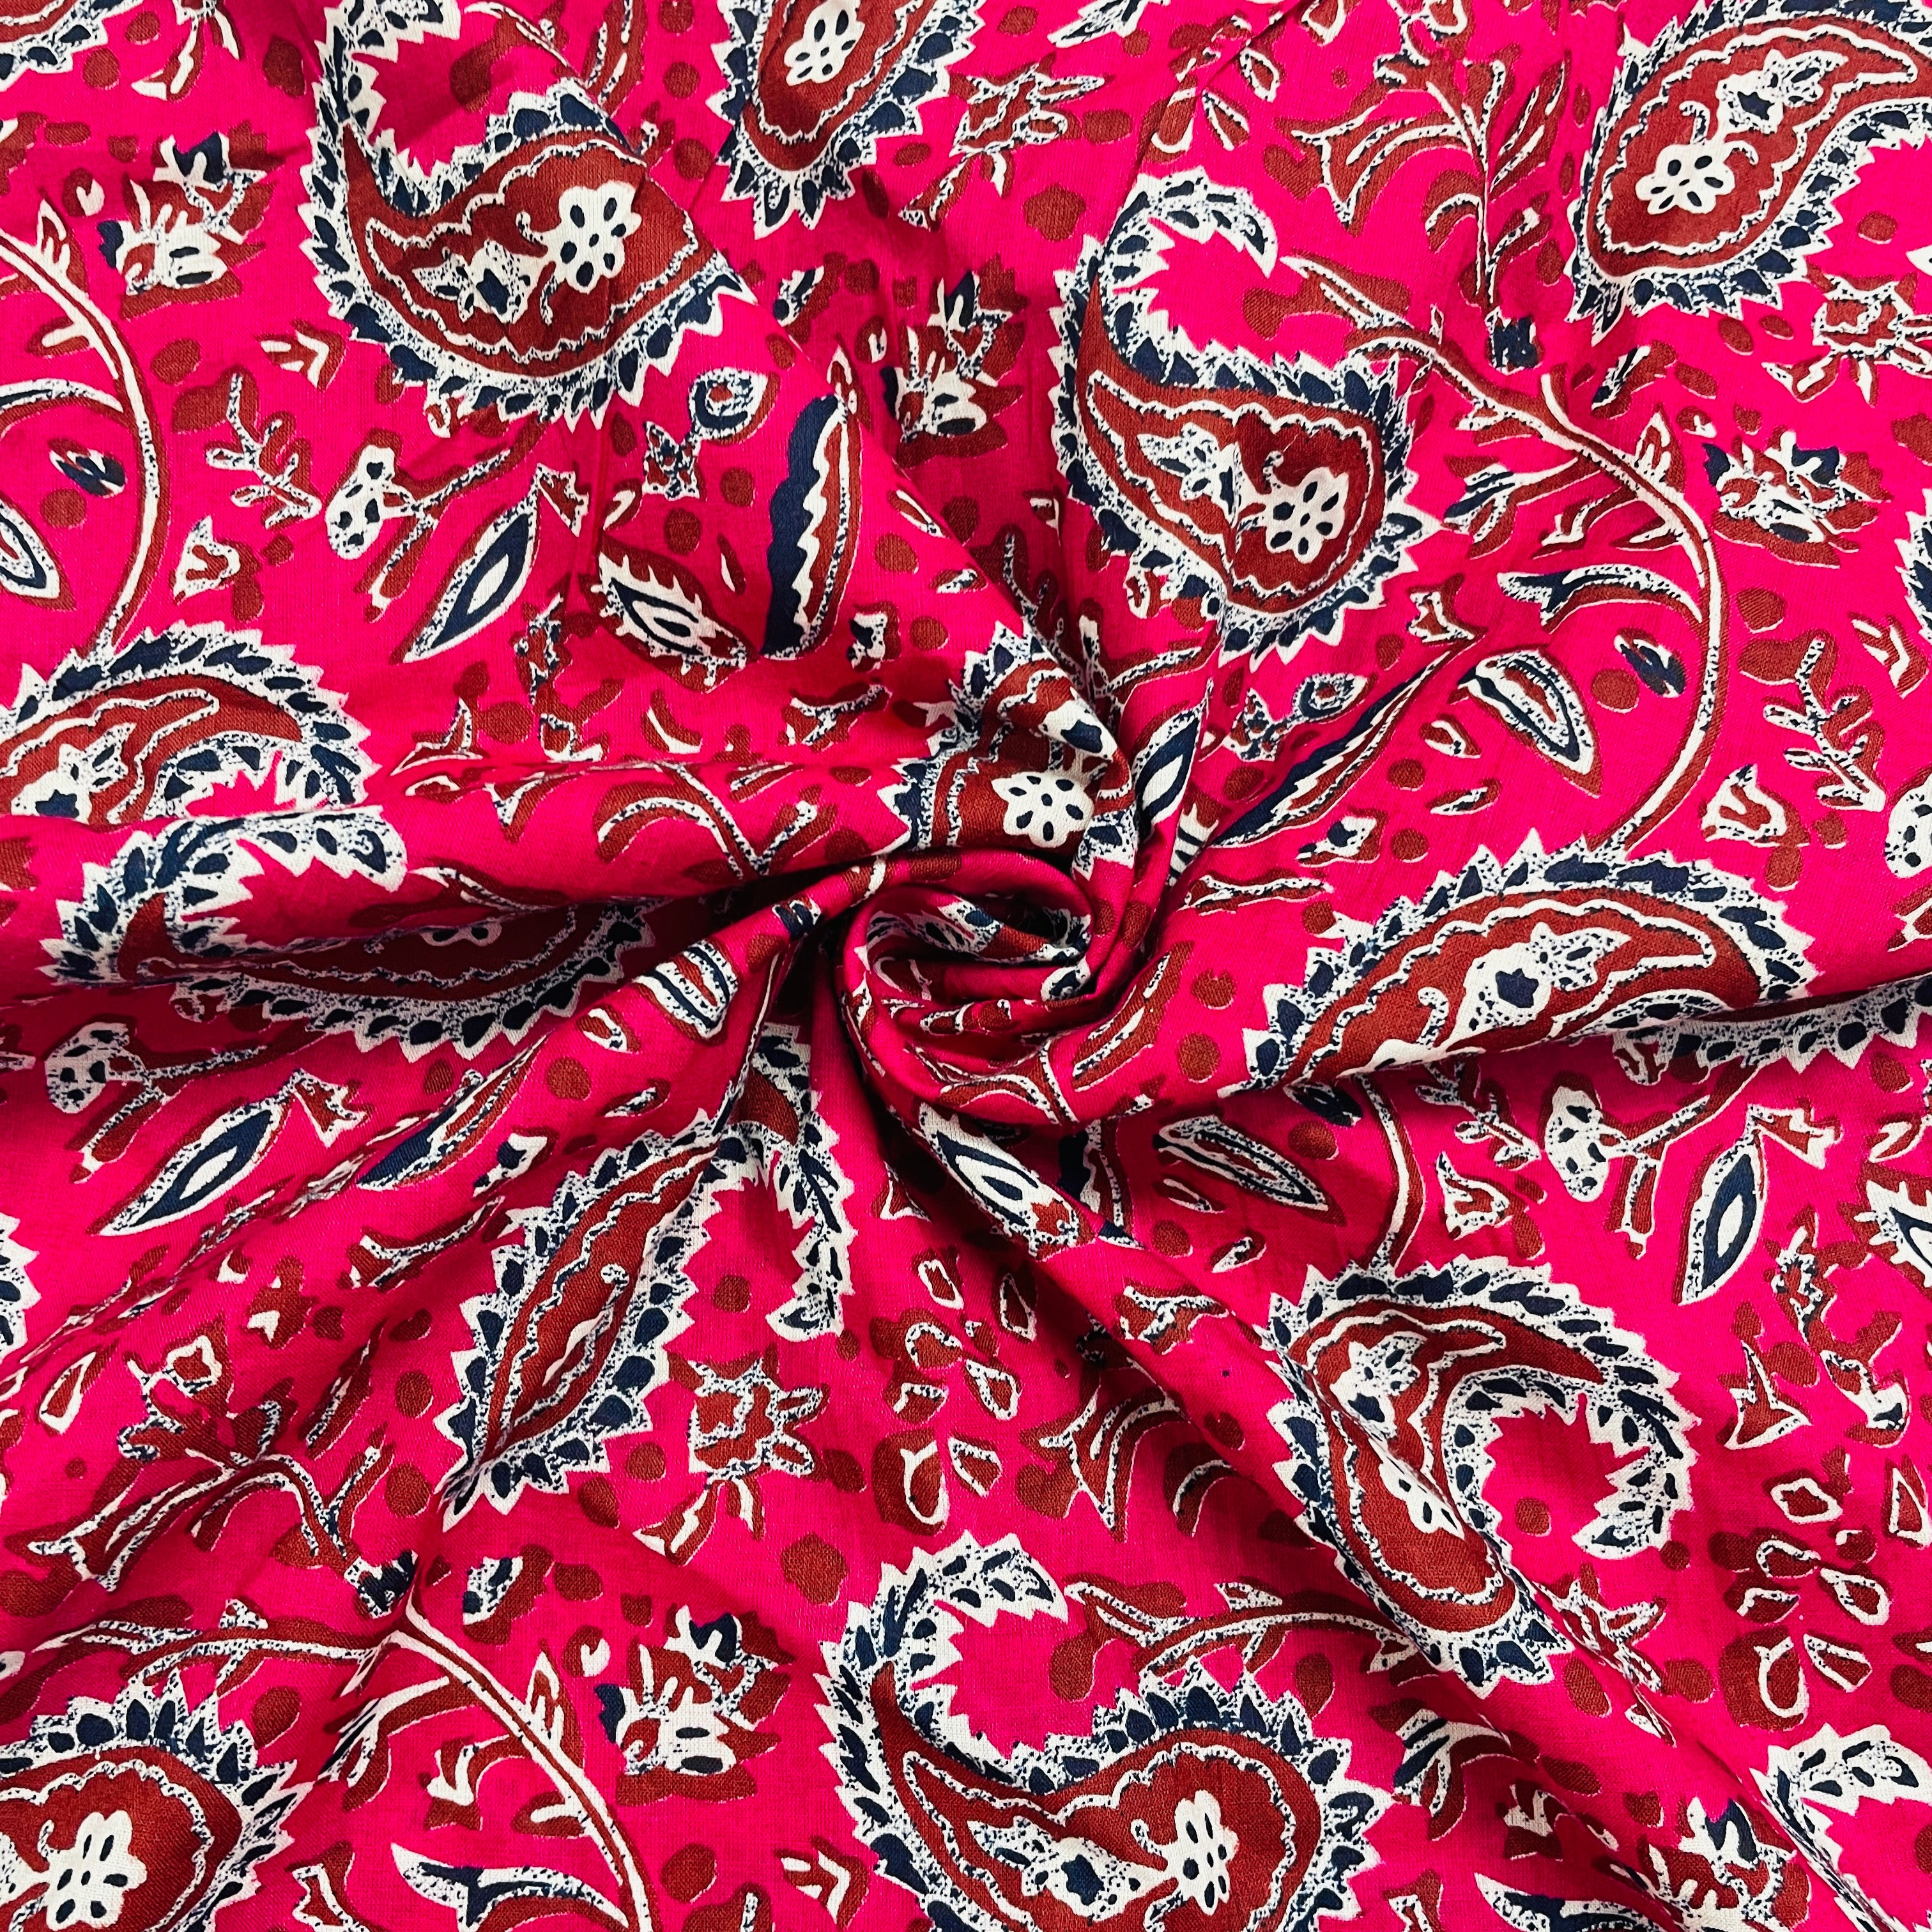 Paisley Print Fabric, 2 Way Stretch, Multi Color